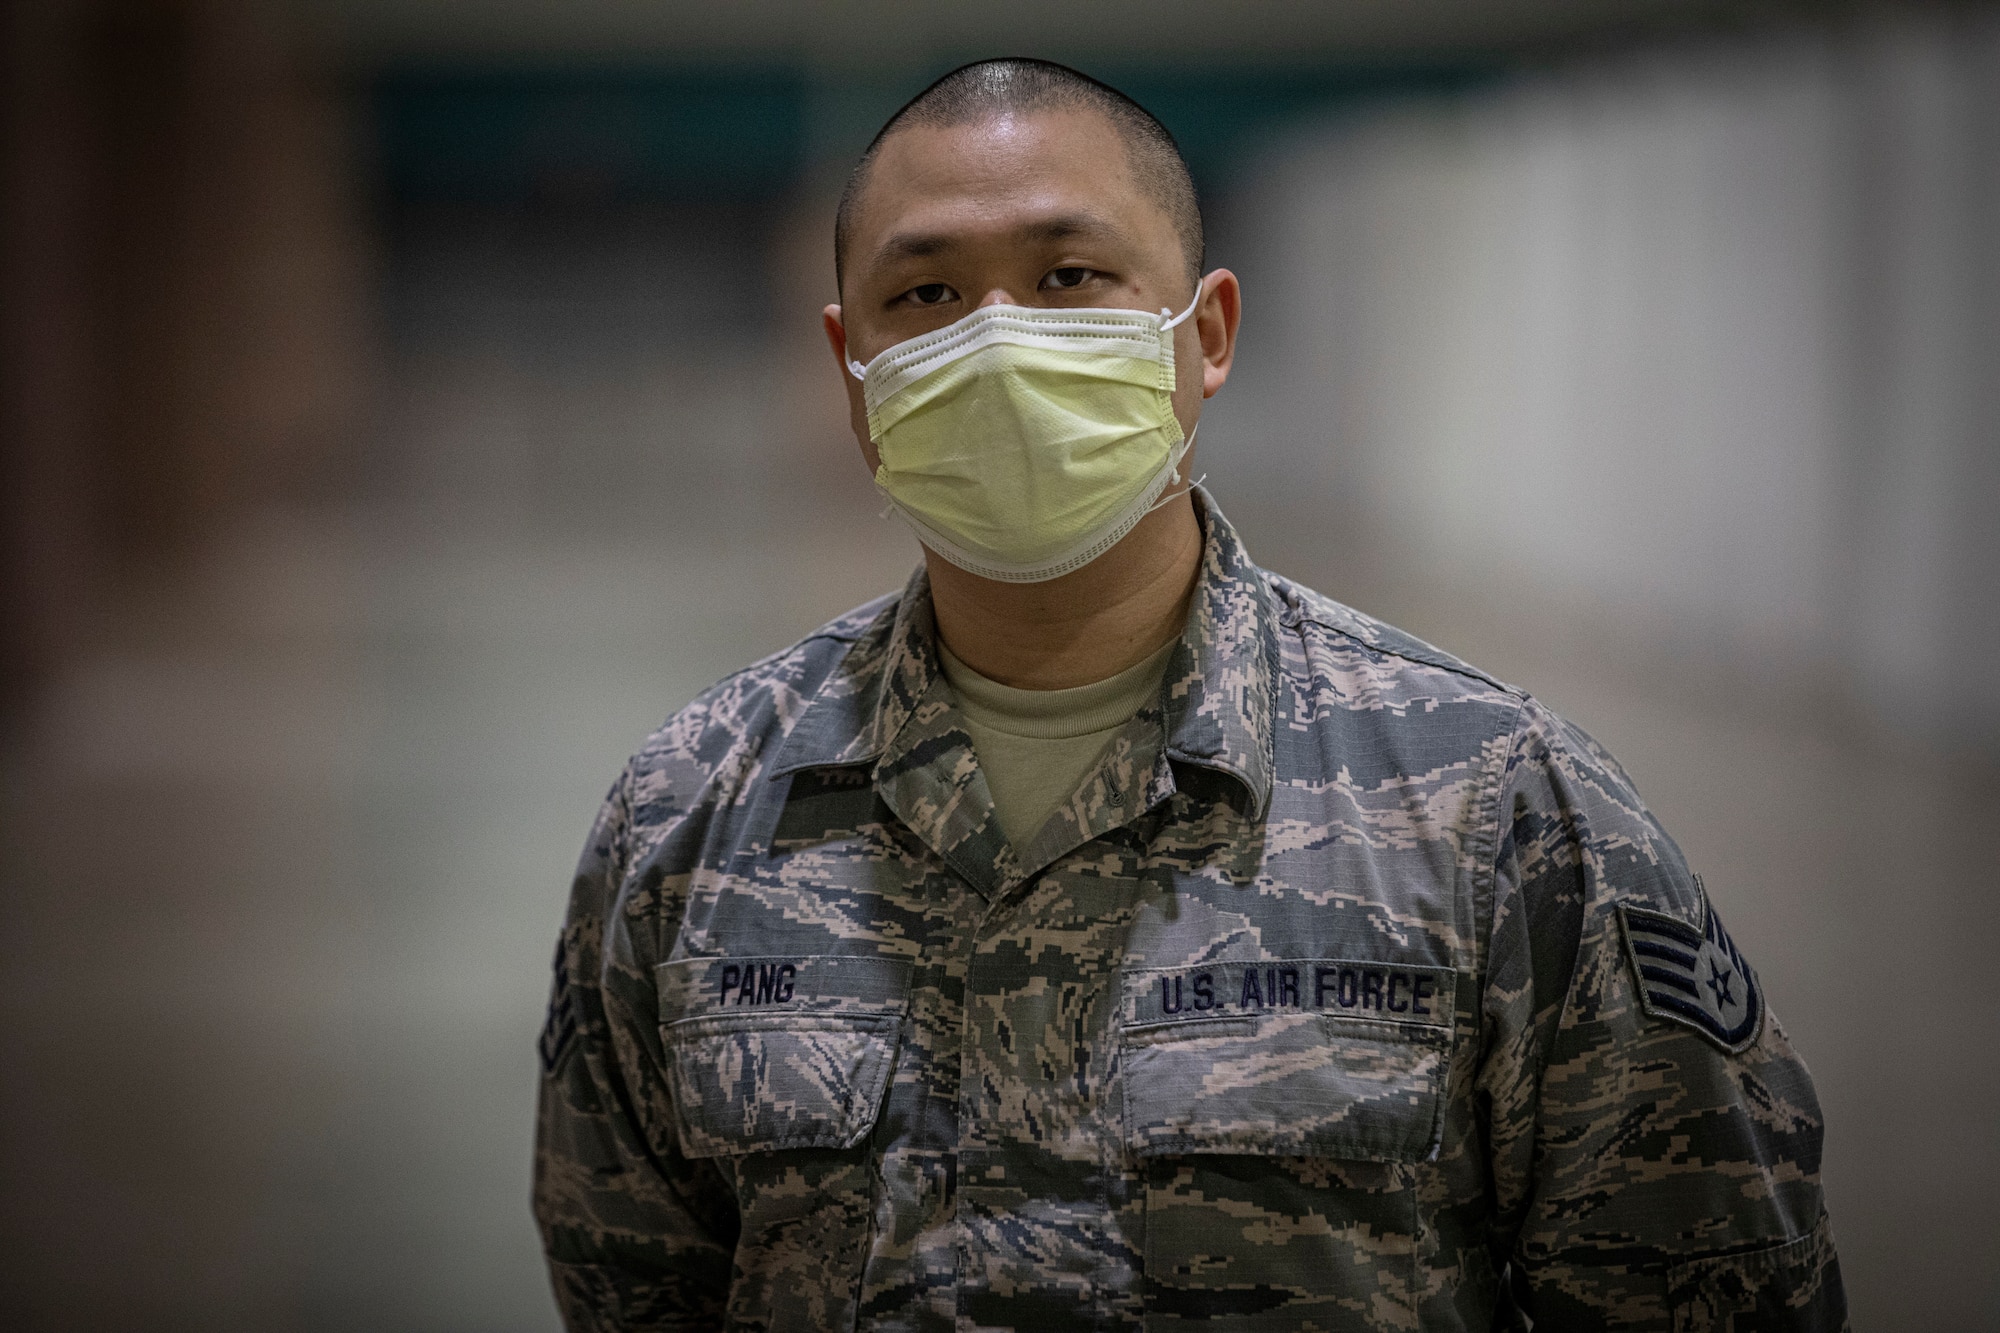 New Jersey Air National Guard Staff Sgt. Dave Pang stands for a portrait during the buildup of a Field Medical Station at the Atlantic City Convention Center in Atlantic City, N.J., April 9, 2020.  Atlantic City is one of three stations that will offer overflow from local hospitals focused on COVID-19 patients. (U.S. Air National Guard photo by Master Sgt. Matt Hecht)